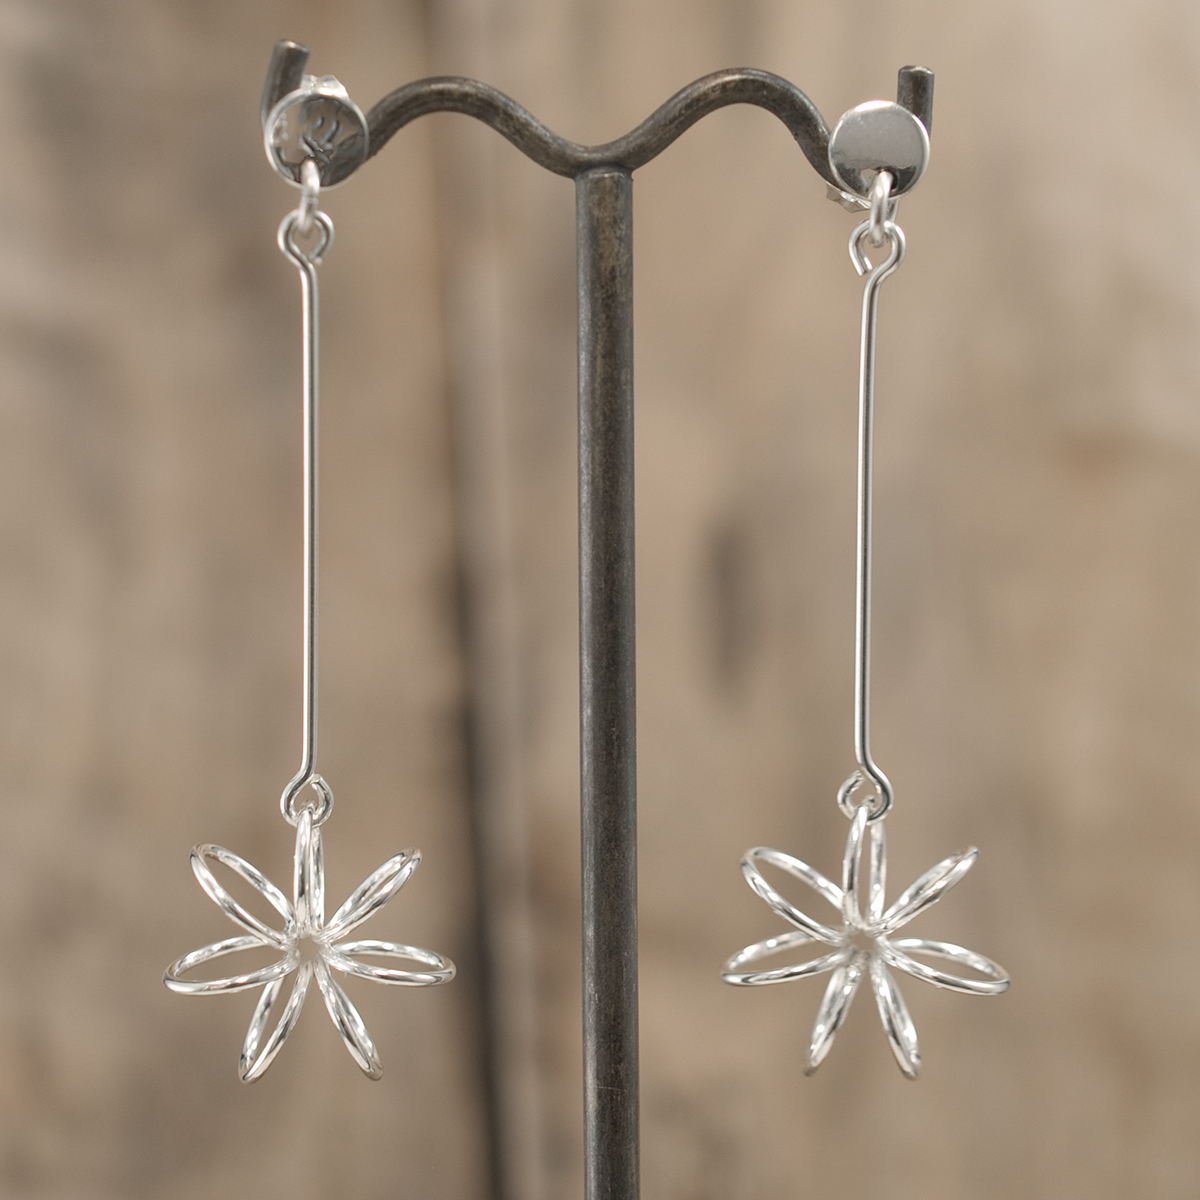 Moineir Floating Flower Silver Earrings - Studs: where whimsy meets elegance in stunning craftsmanship. Handcrafted from .925 sterling silver, these earrings feature a charming 14mm flower on a slim 36mm stem, they strike a perfect balance between subtlety and statement. With a secure friction back, they're comfortable for day-to-night wear.&nbsp;